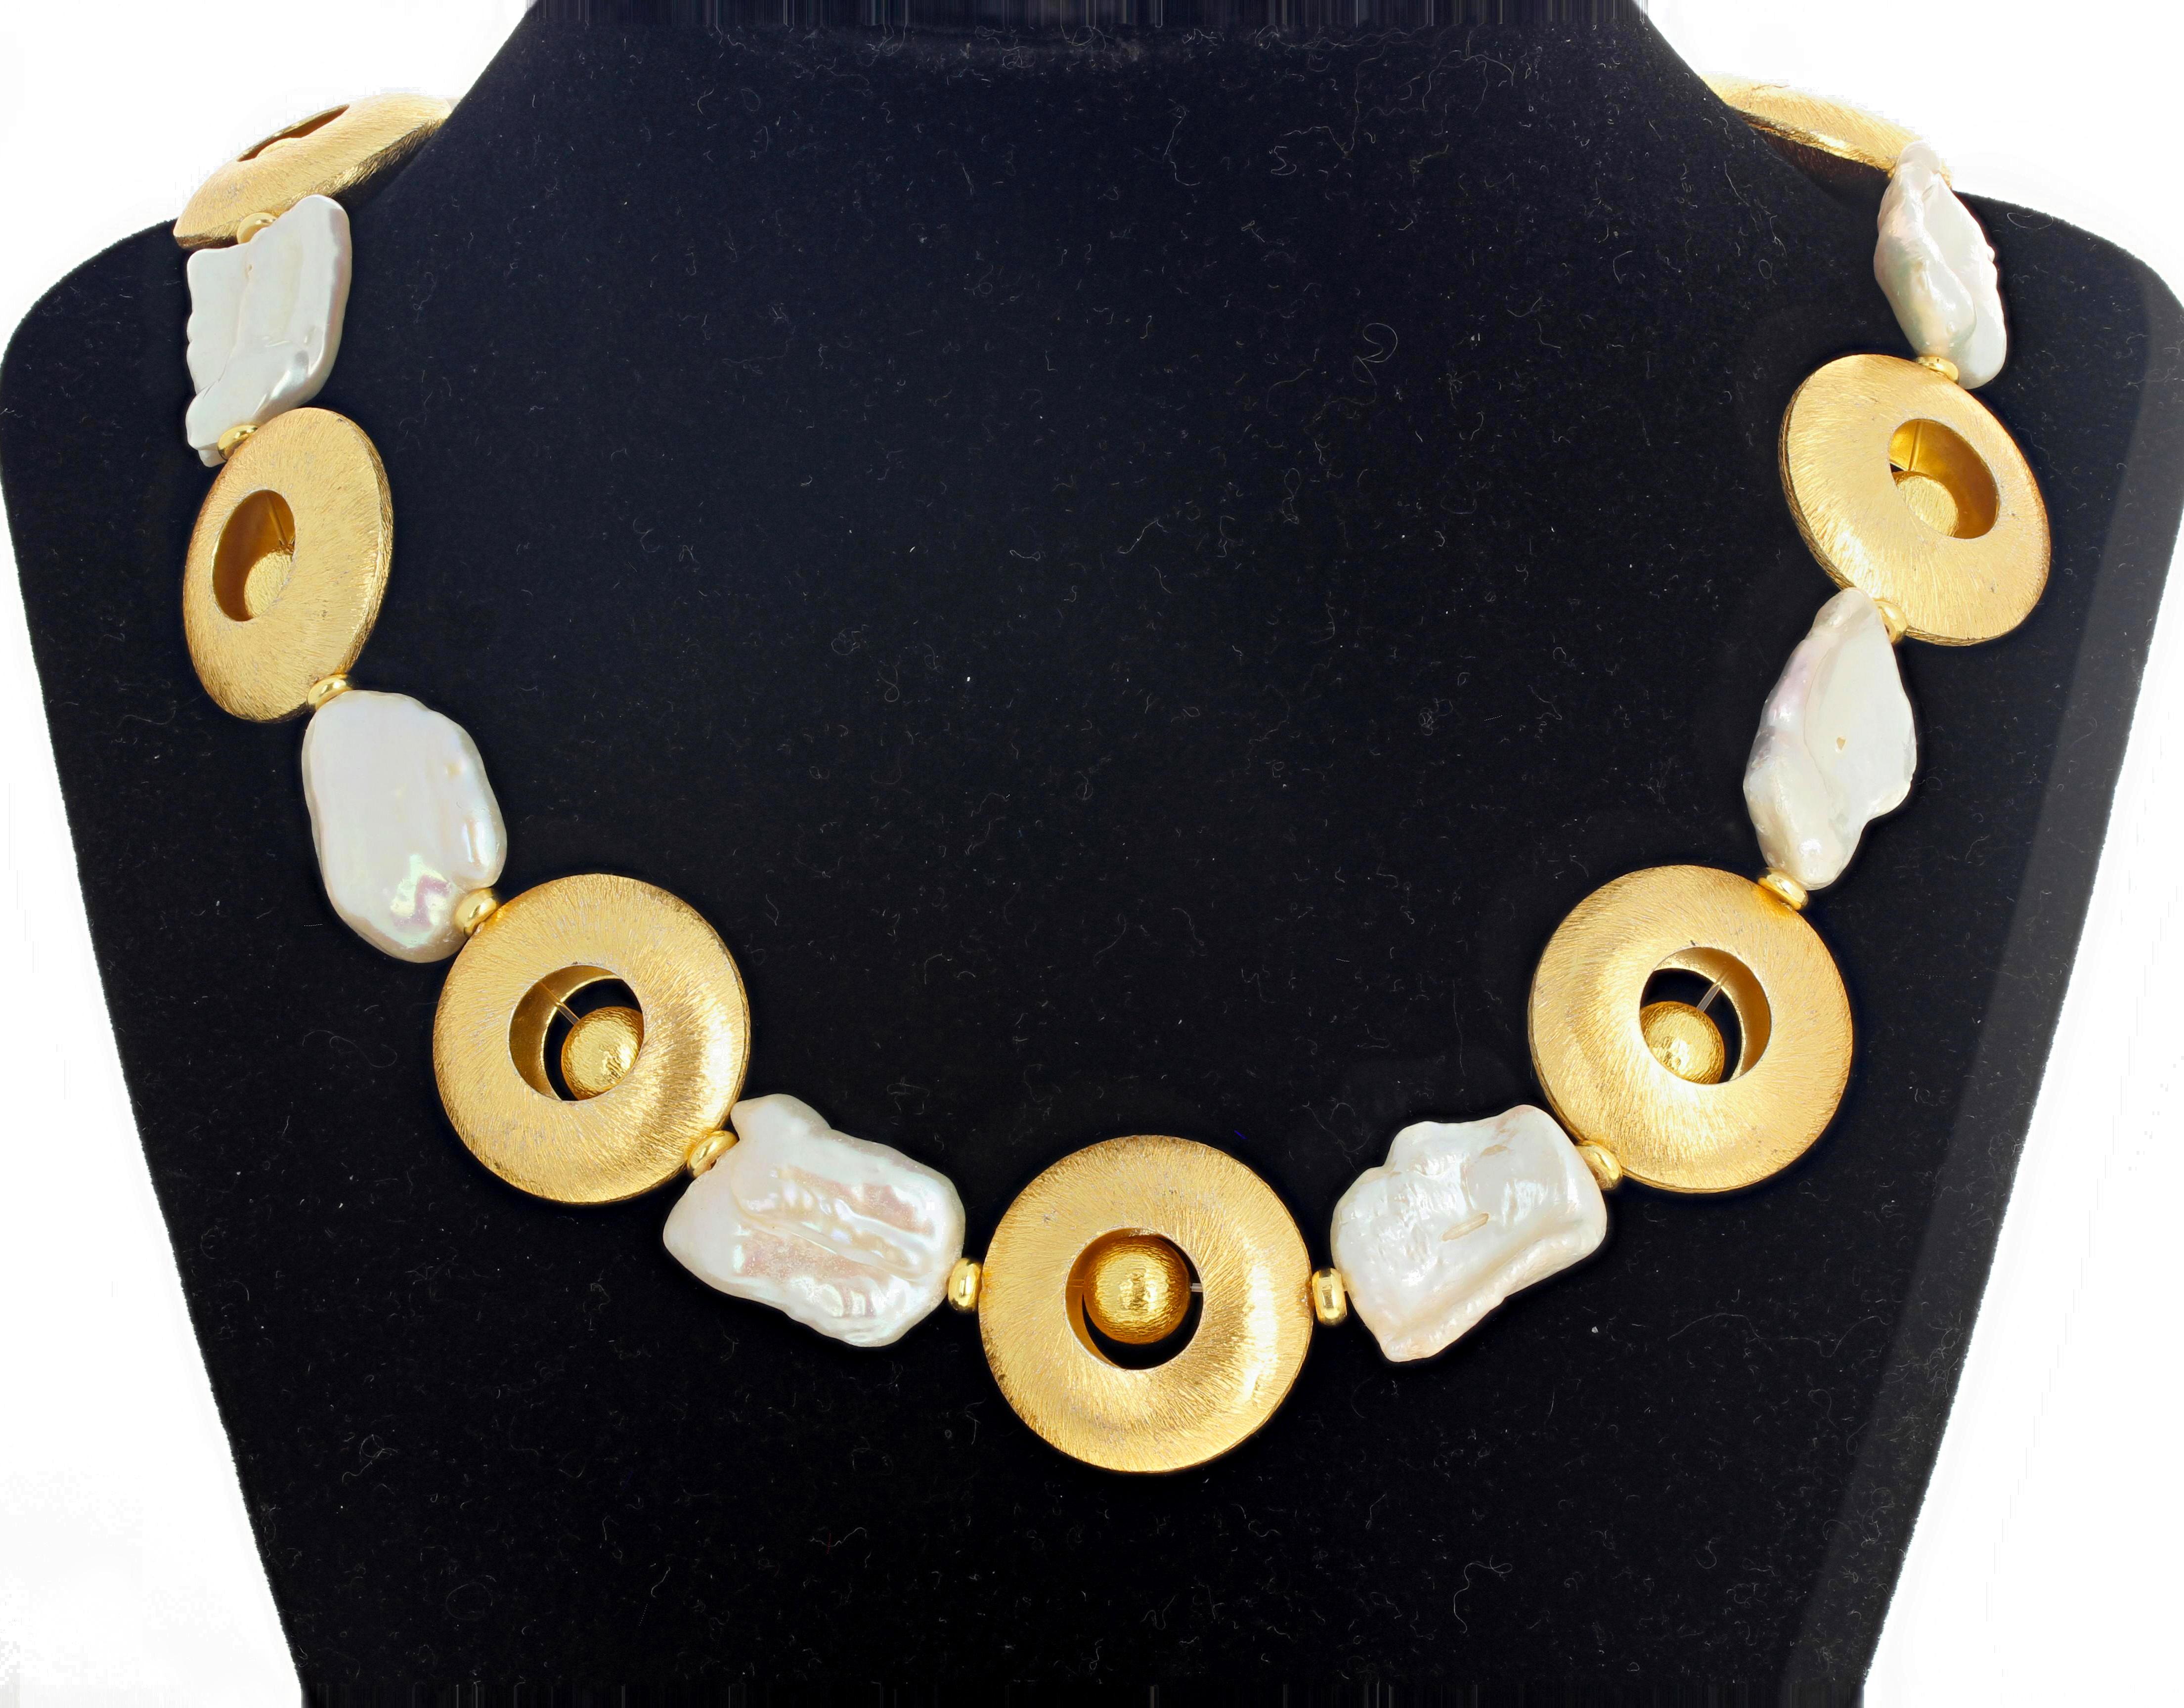 Beautiful vermeil (gold plated sterling silver) rings with flippy gold plated sterling silver balls enhanced by gorgeous white cultured pearls combine to make this necklace unusually beautiful and glamorous.  The Vermeil rings are 25 mm across and